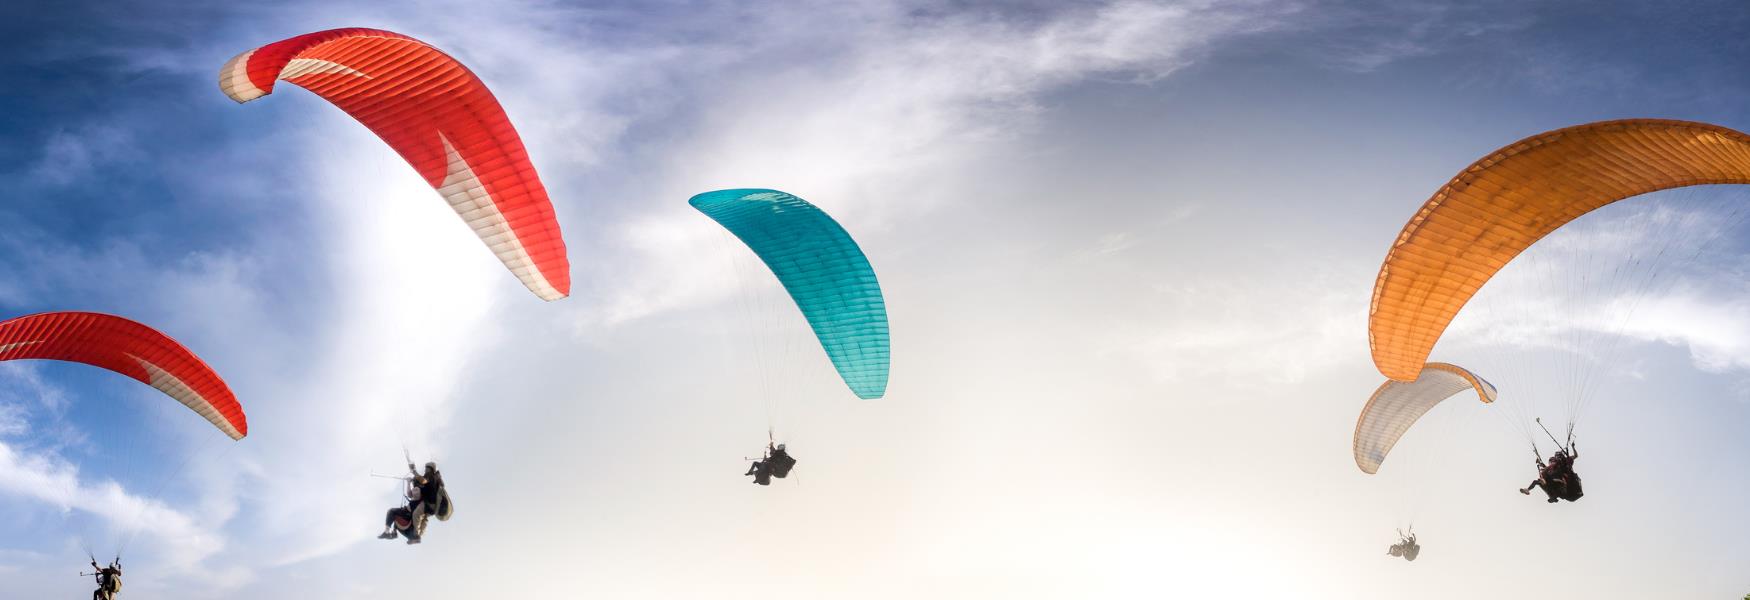 image shows paragliders